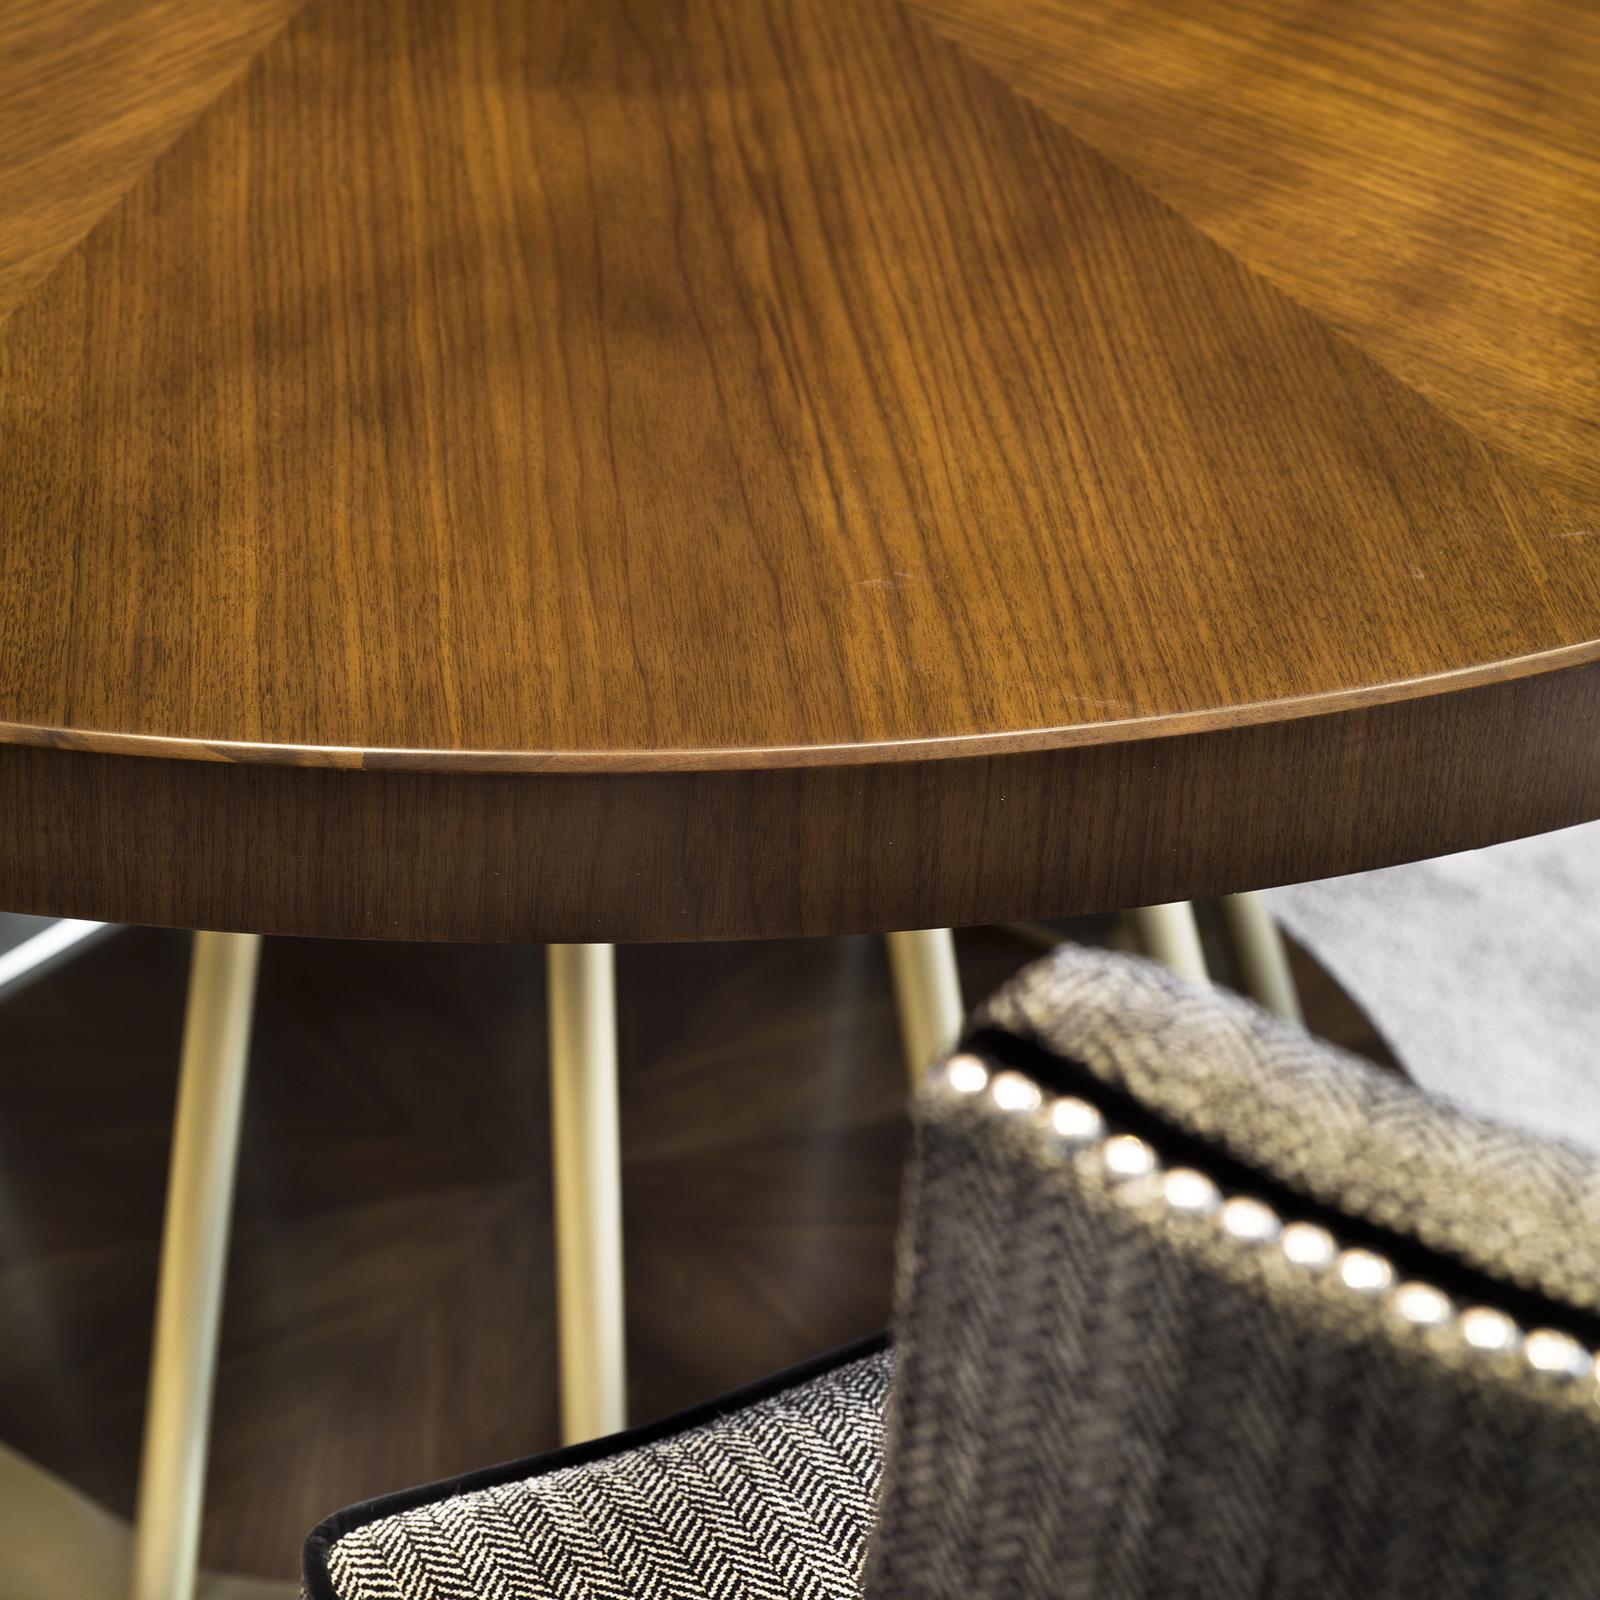 This superb table will be an exquisite addition to a dining room or large entryway, bringing sophistication to any home. The round top in black walnut boasts the natural grain of the wood and occurs also in the base, which features a handcrafted